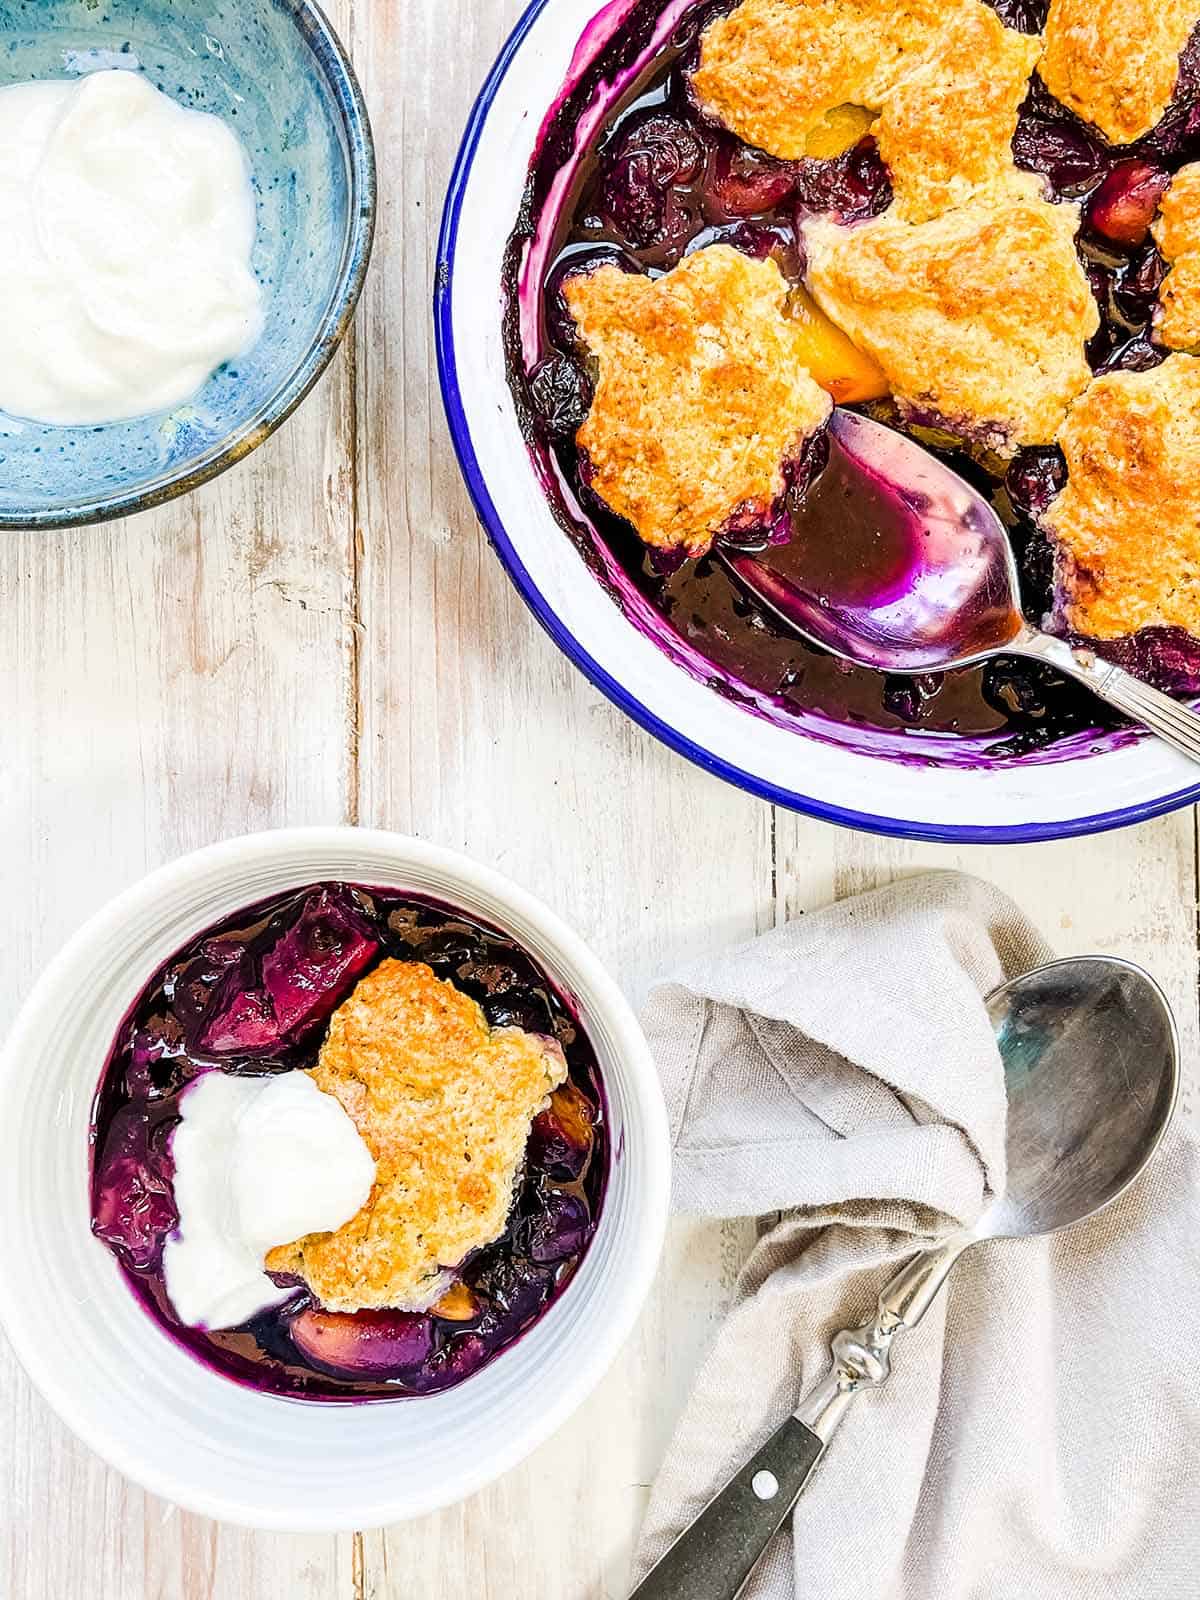 A dish and bowl of peach and blueberry cobbler on a white table.